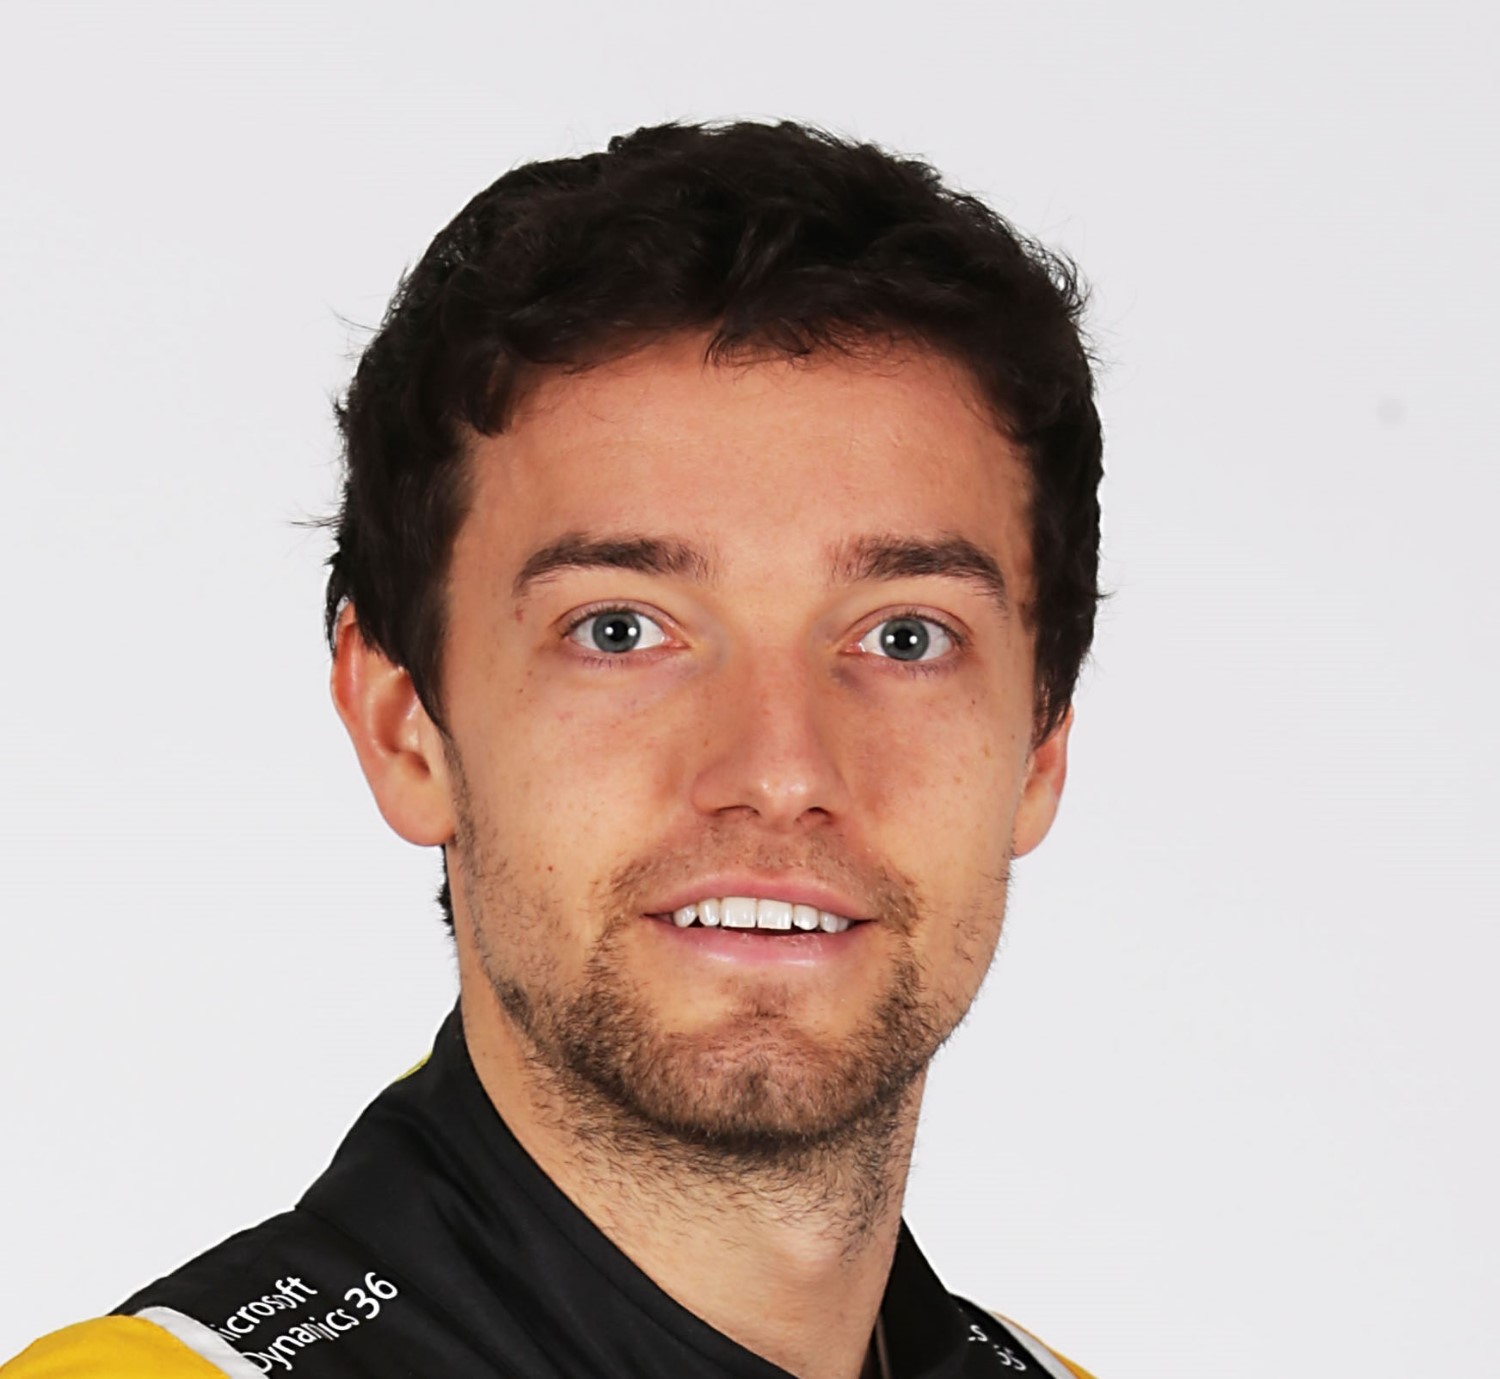 Jolyon Palmer says the wind made him spin